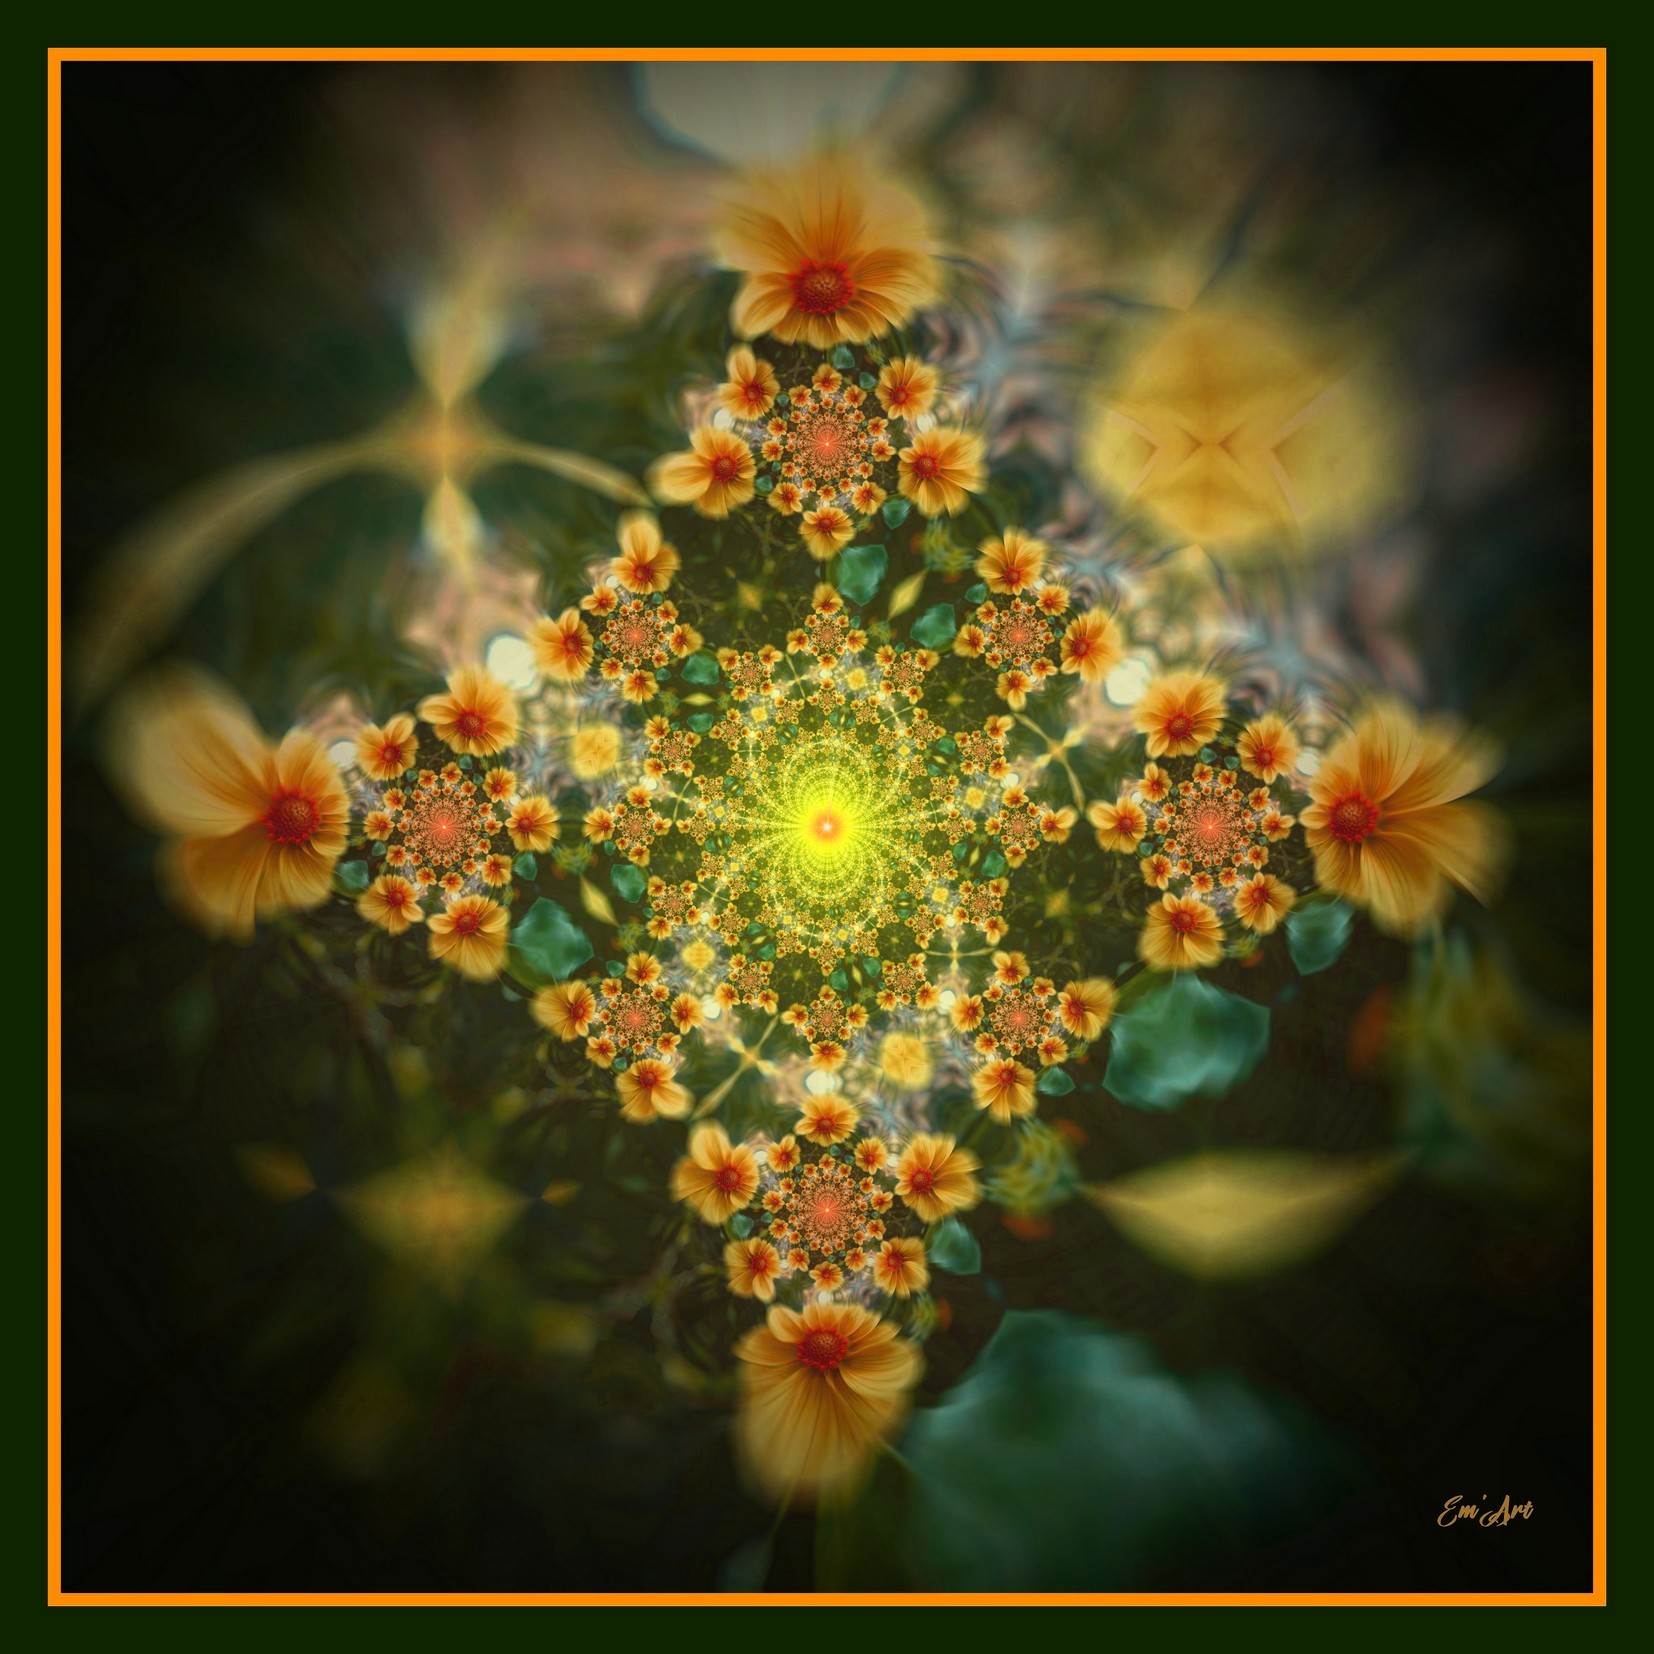 Solar Turn IV, surreal floral photography by Emmanuelle Baudry